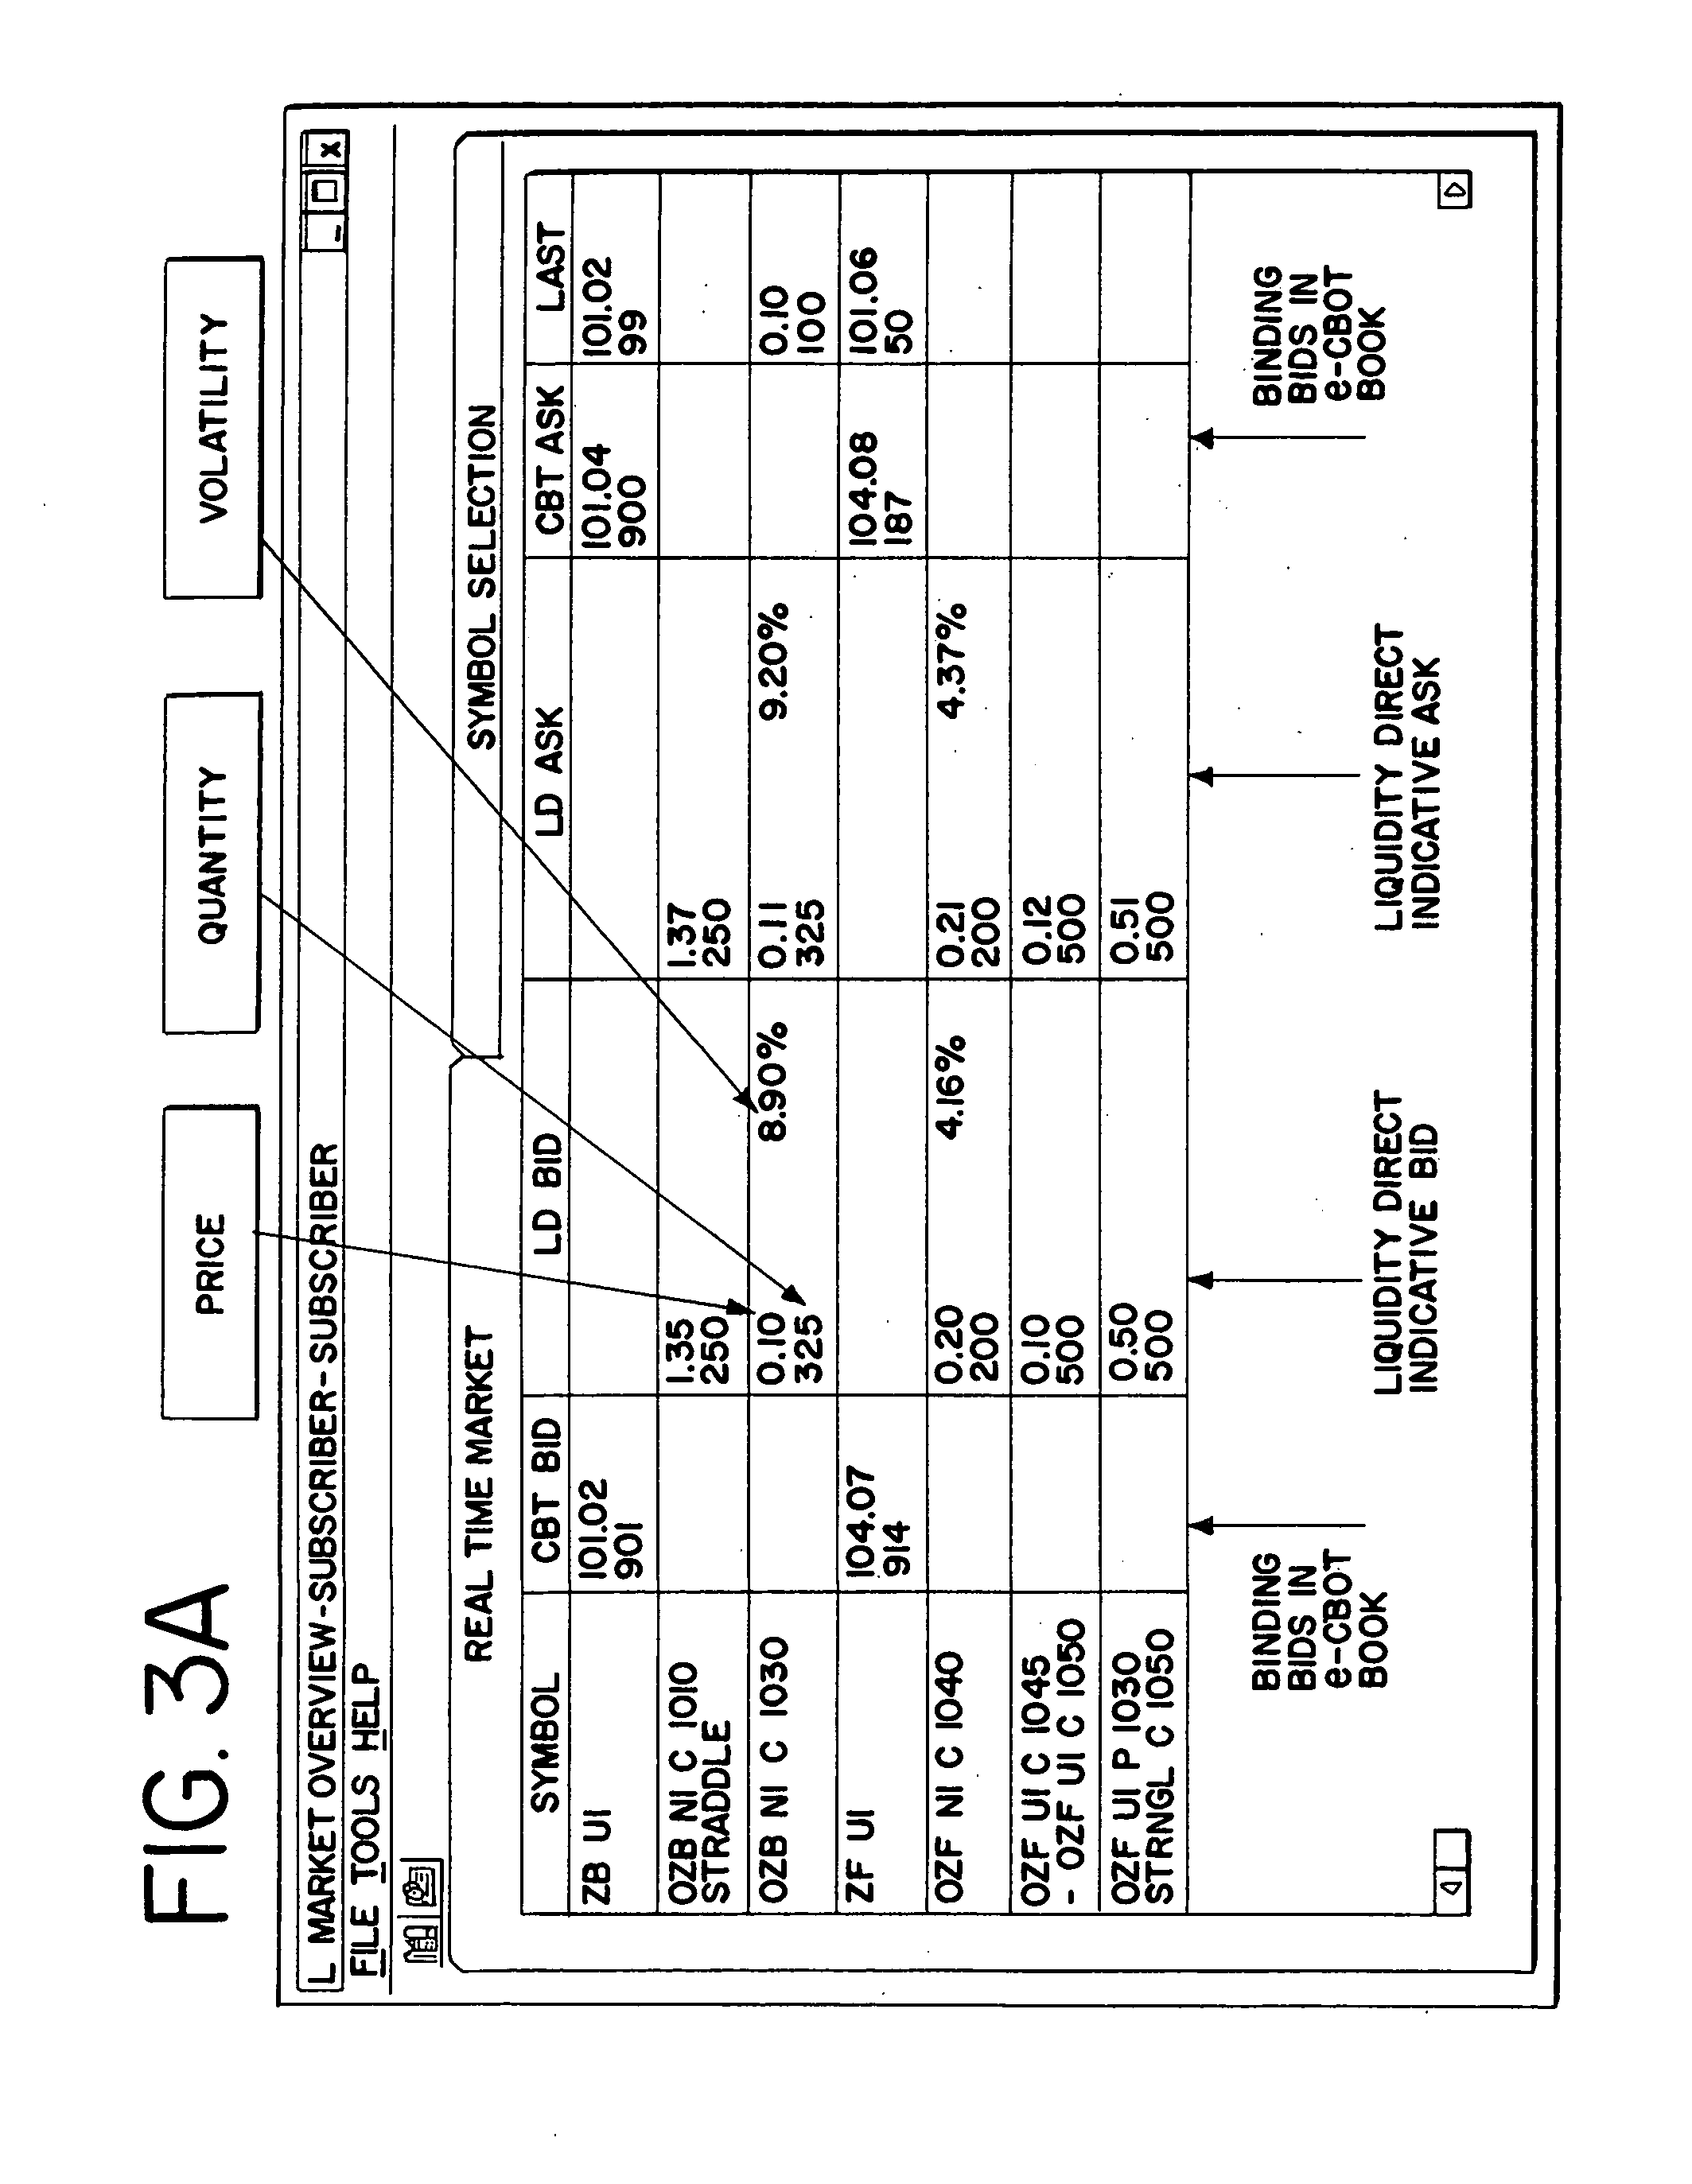 Network and method for trading derivatives